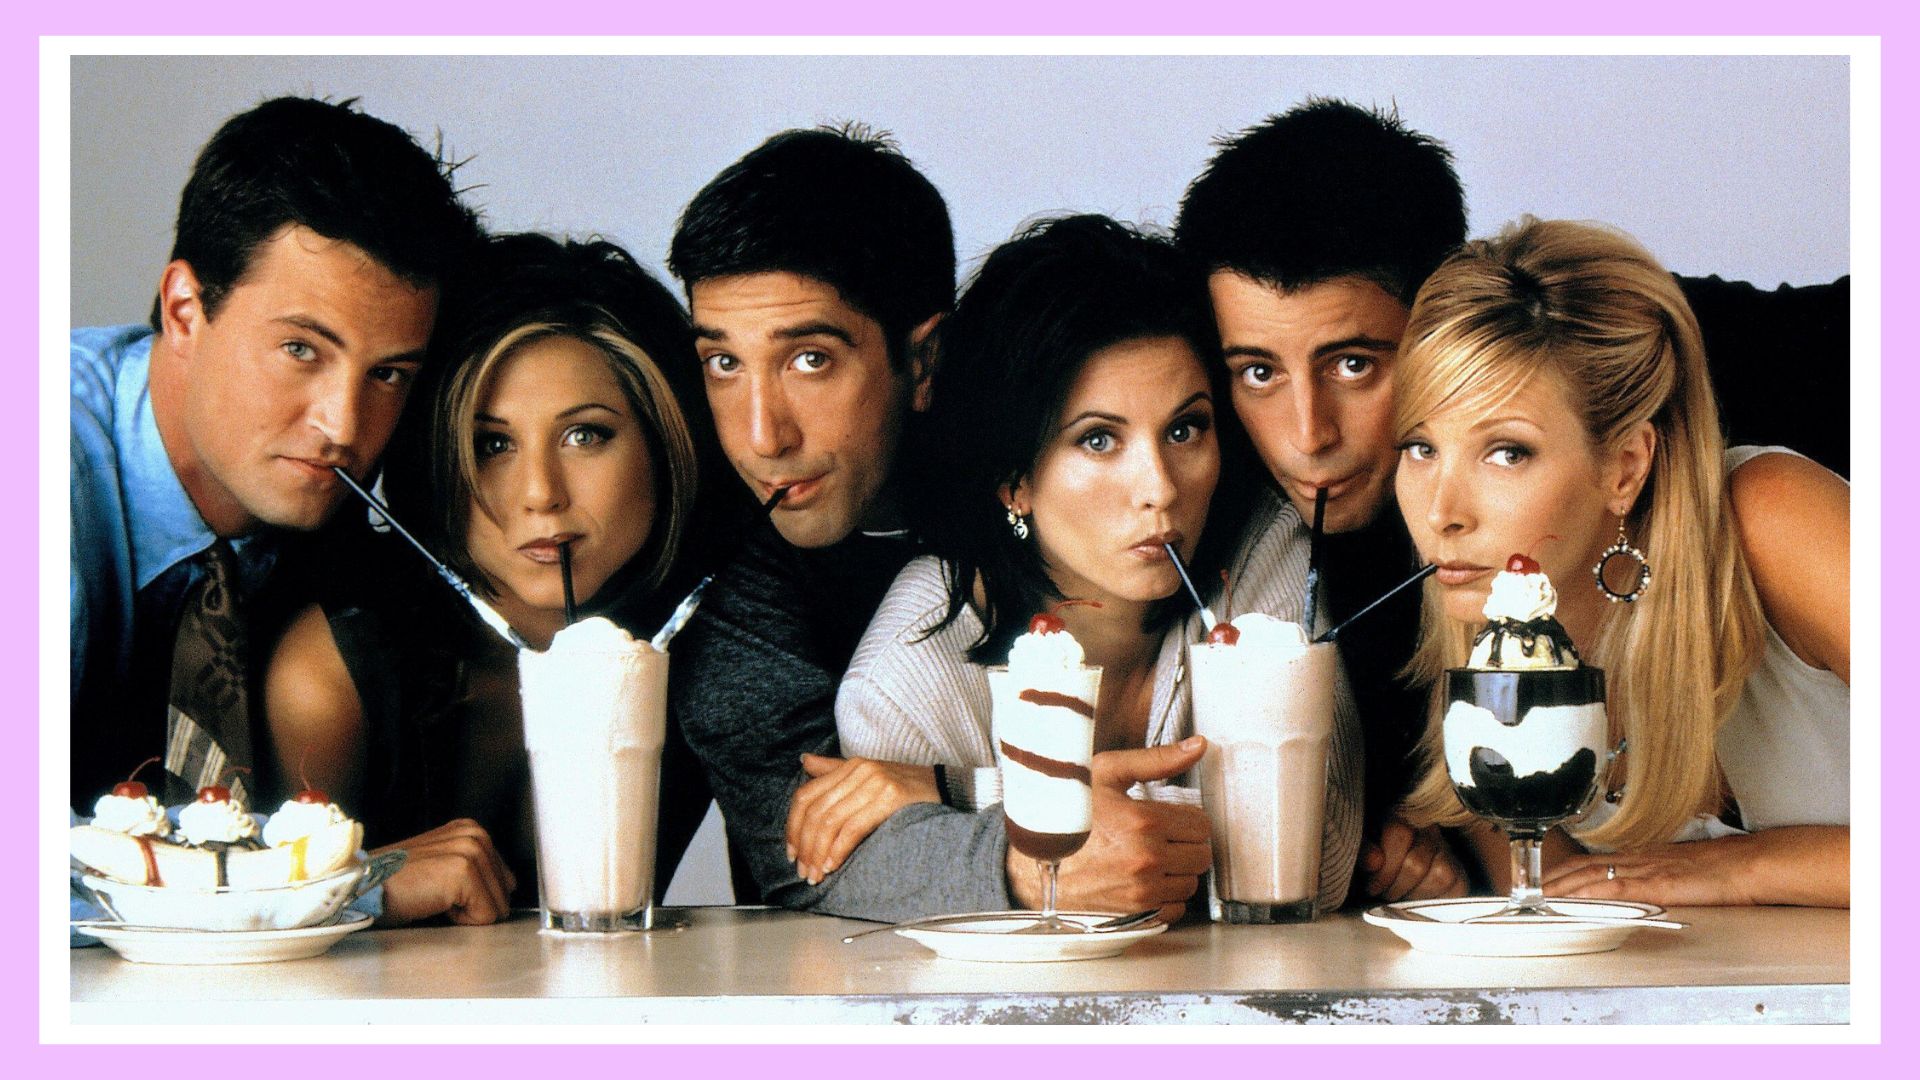 How to Watch Friends on Netflix in 2023 in the US (it's easy!)